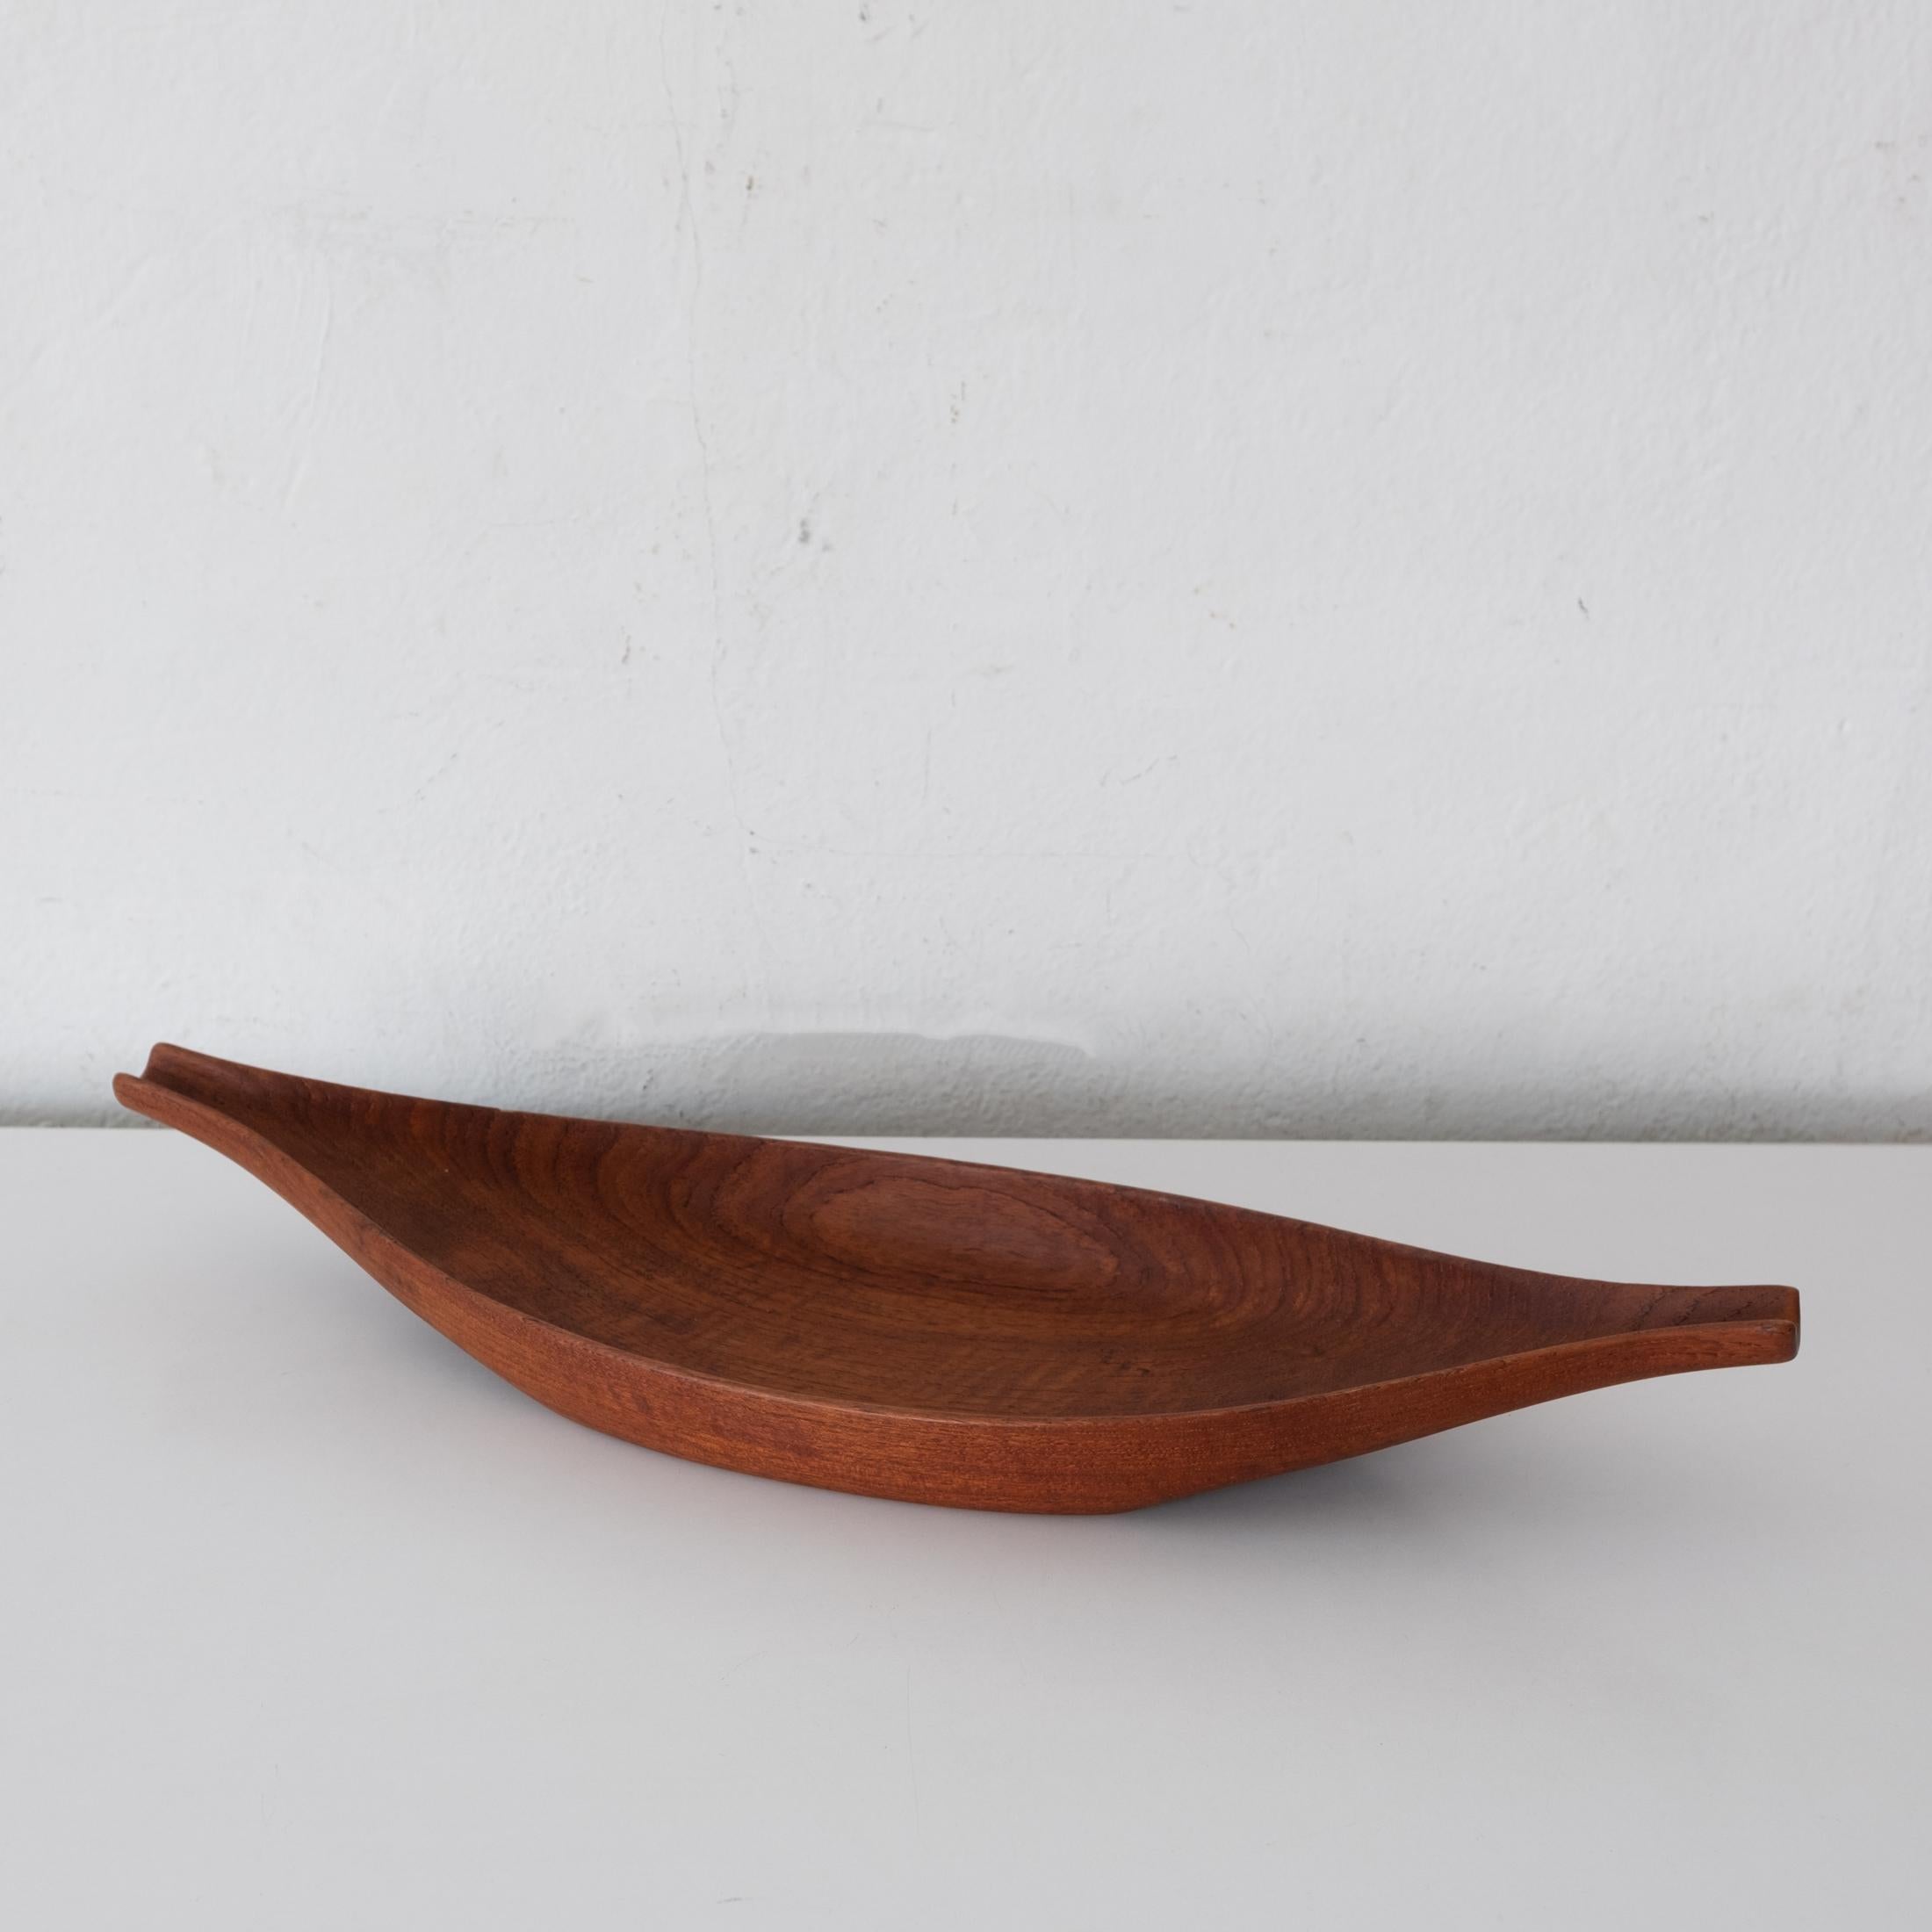 Sculptural centerpiece piece bowl by Anri. Beautiful grain and craftsmanship. 1950s

Anri was founded in 1912 in the Dolomite Mountains of northern Italy.